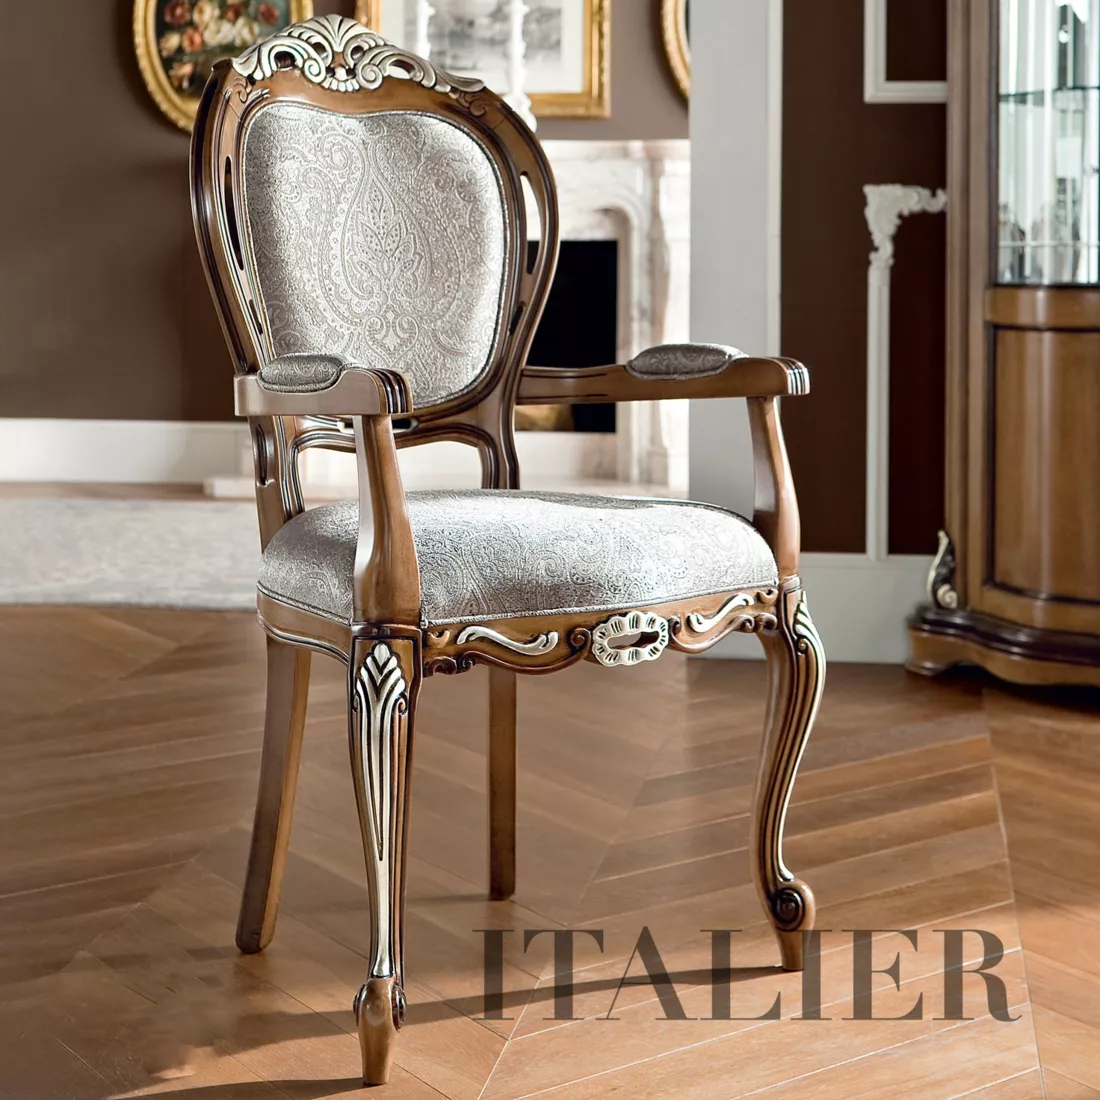 Classic-padded-and-carved-luxury-chair-Italian-furniture-Bella-Vita-collection-Modenese-Gastone - kopie